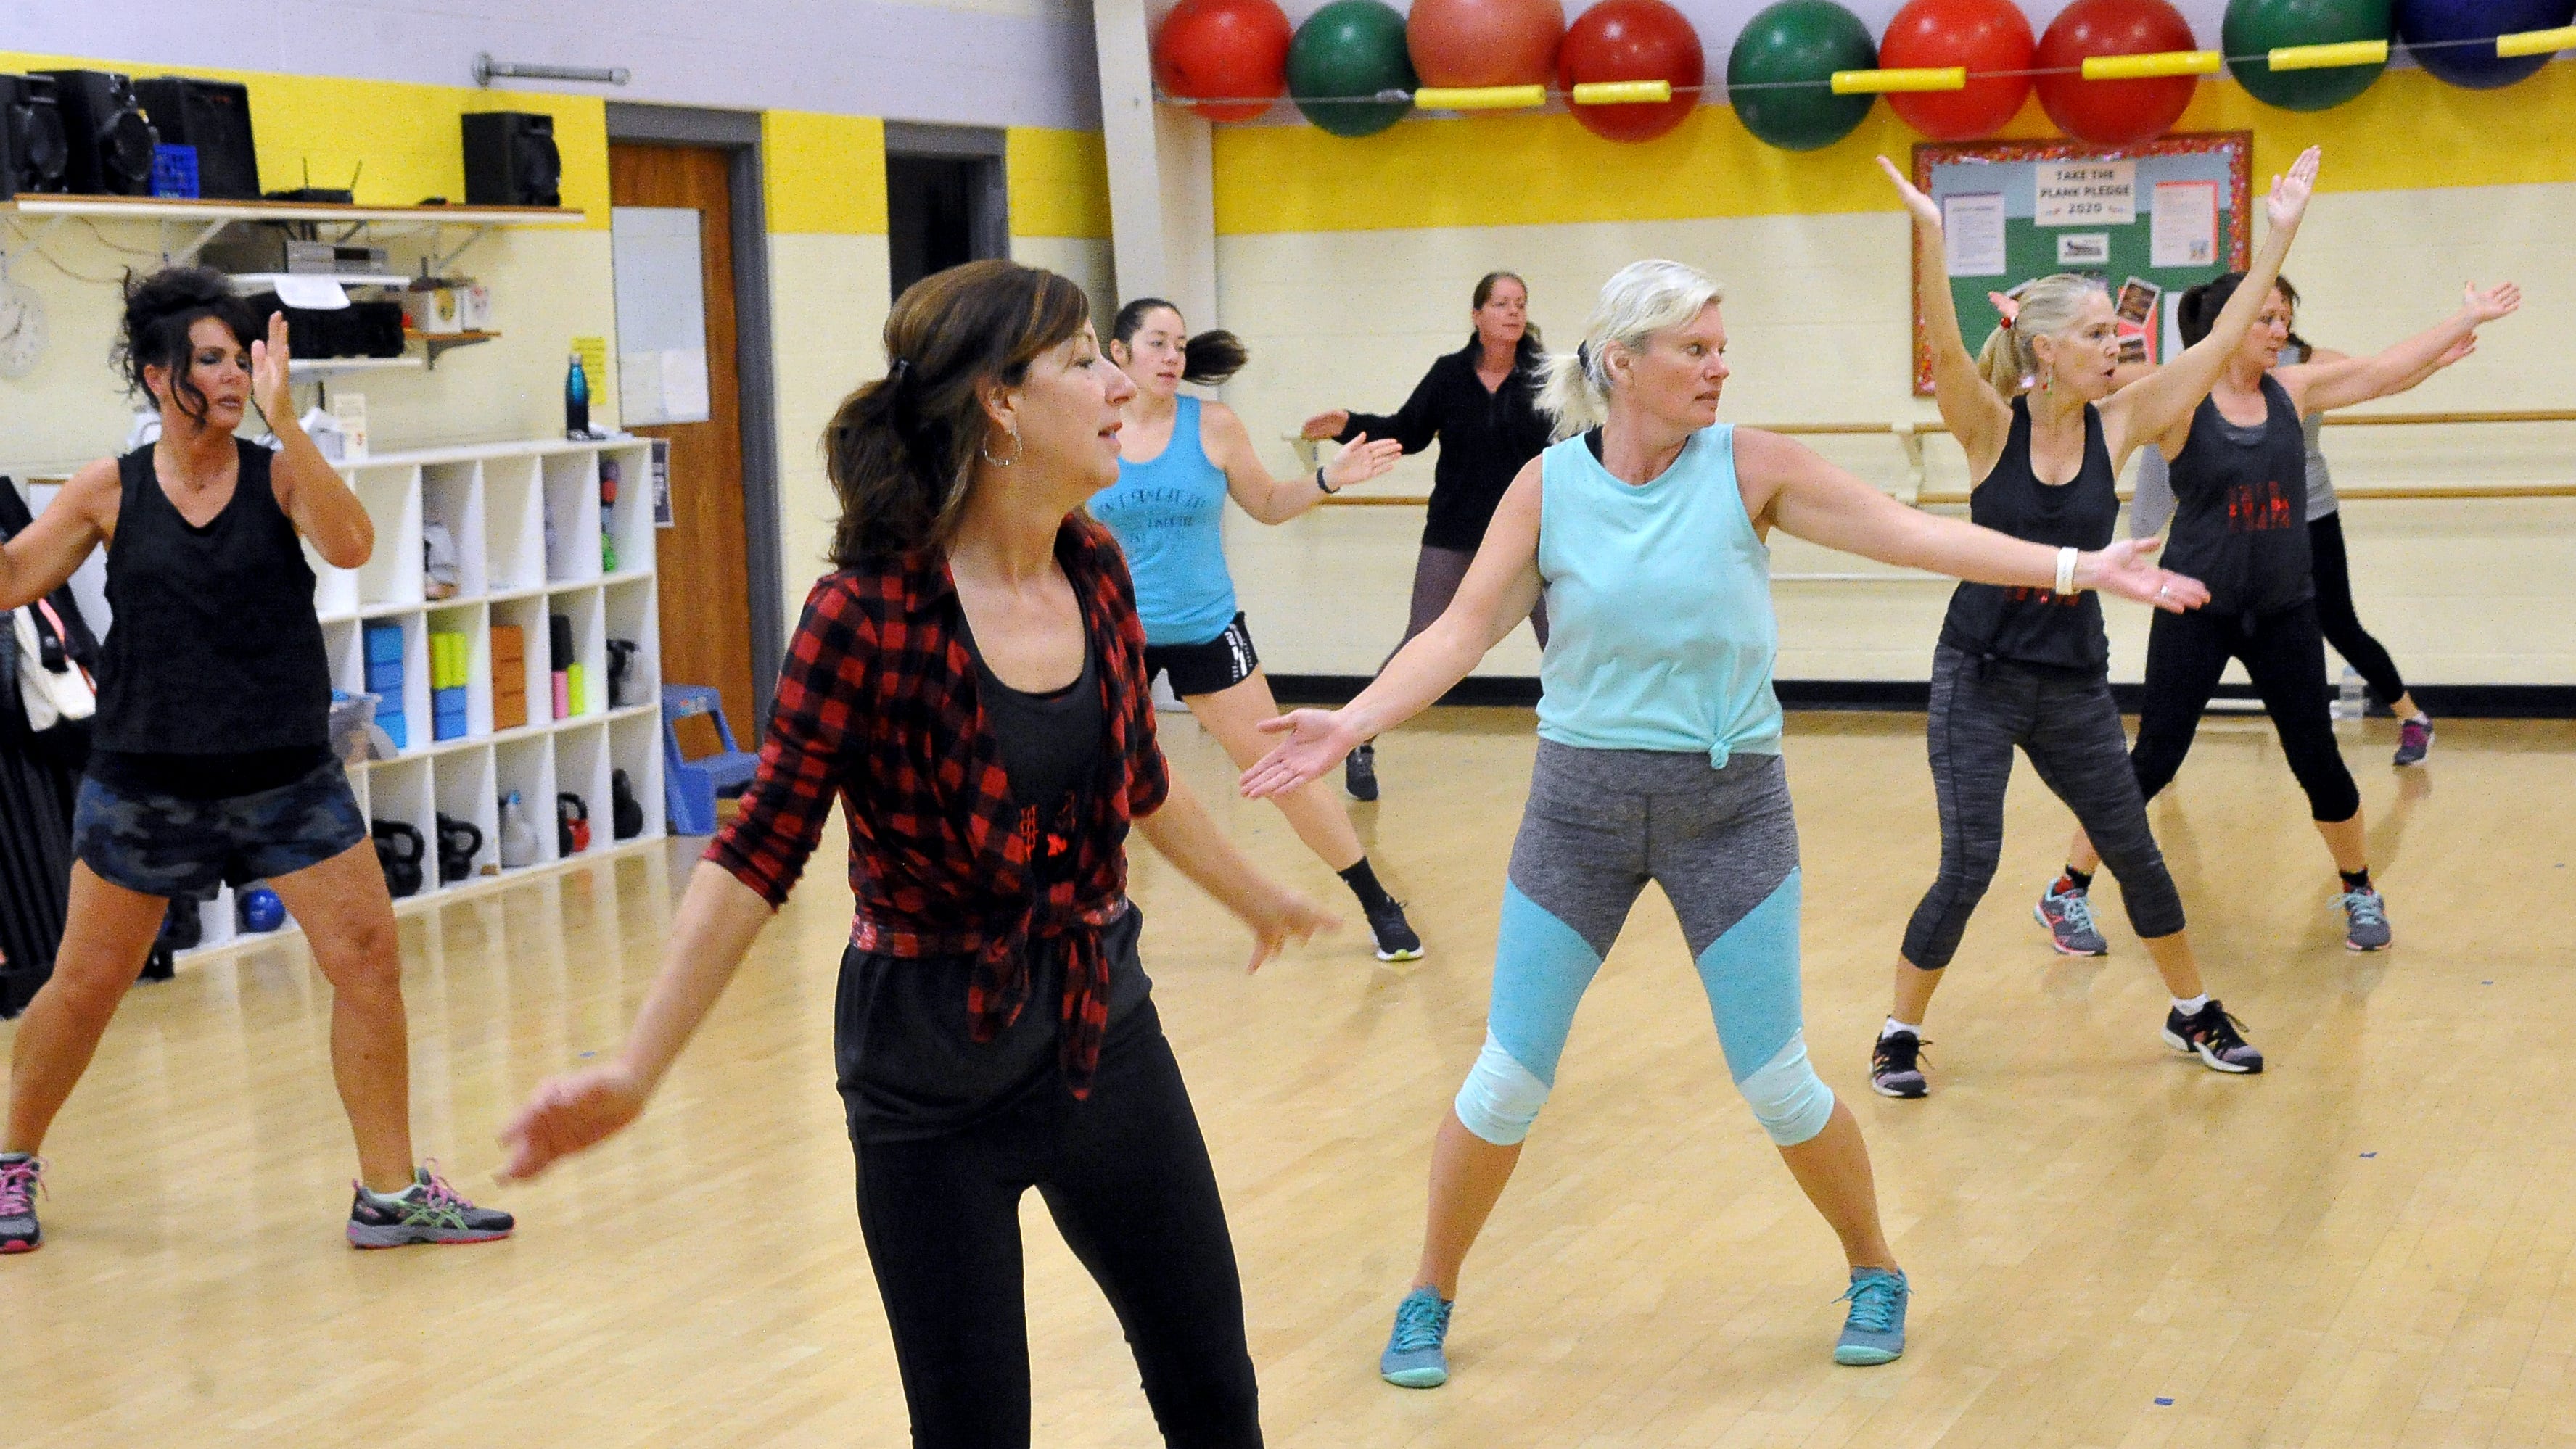 Zumba is one of the many classes offered at the Orrville YMCA.